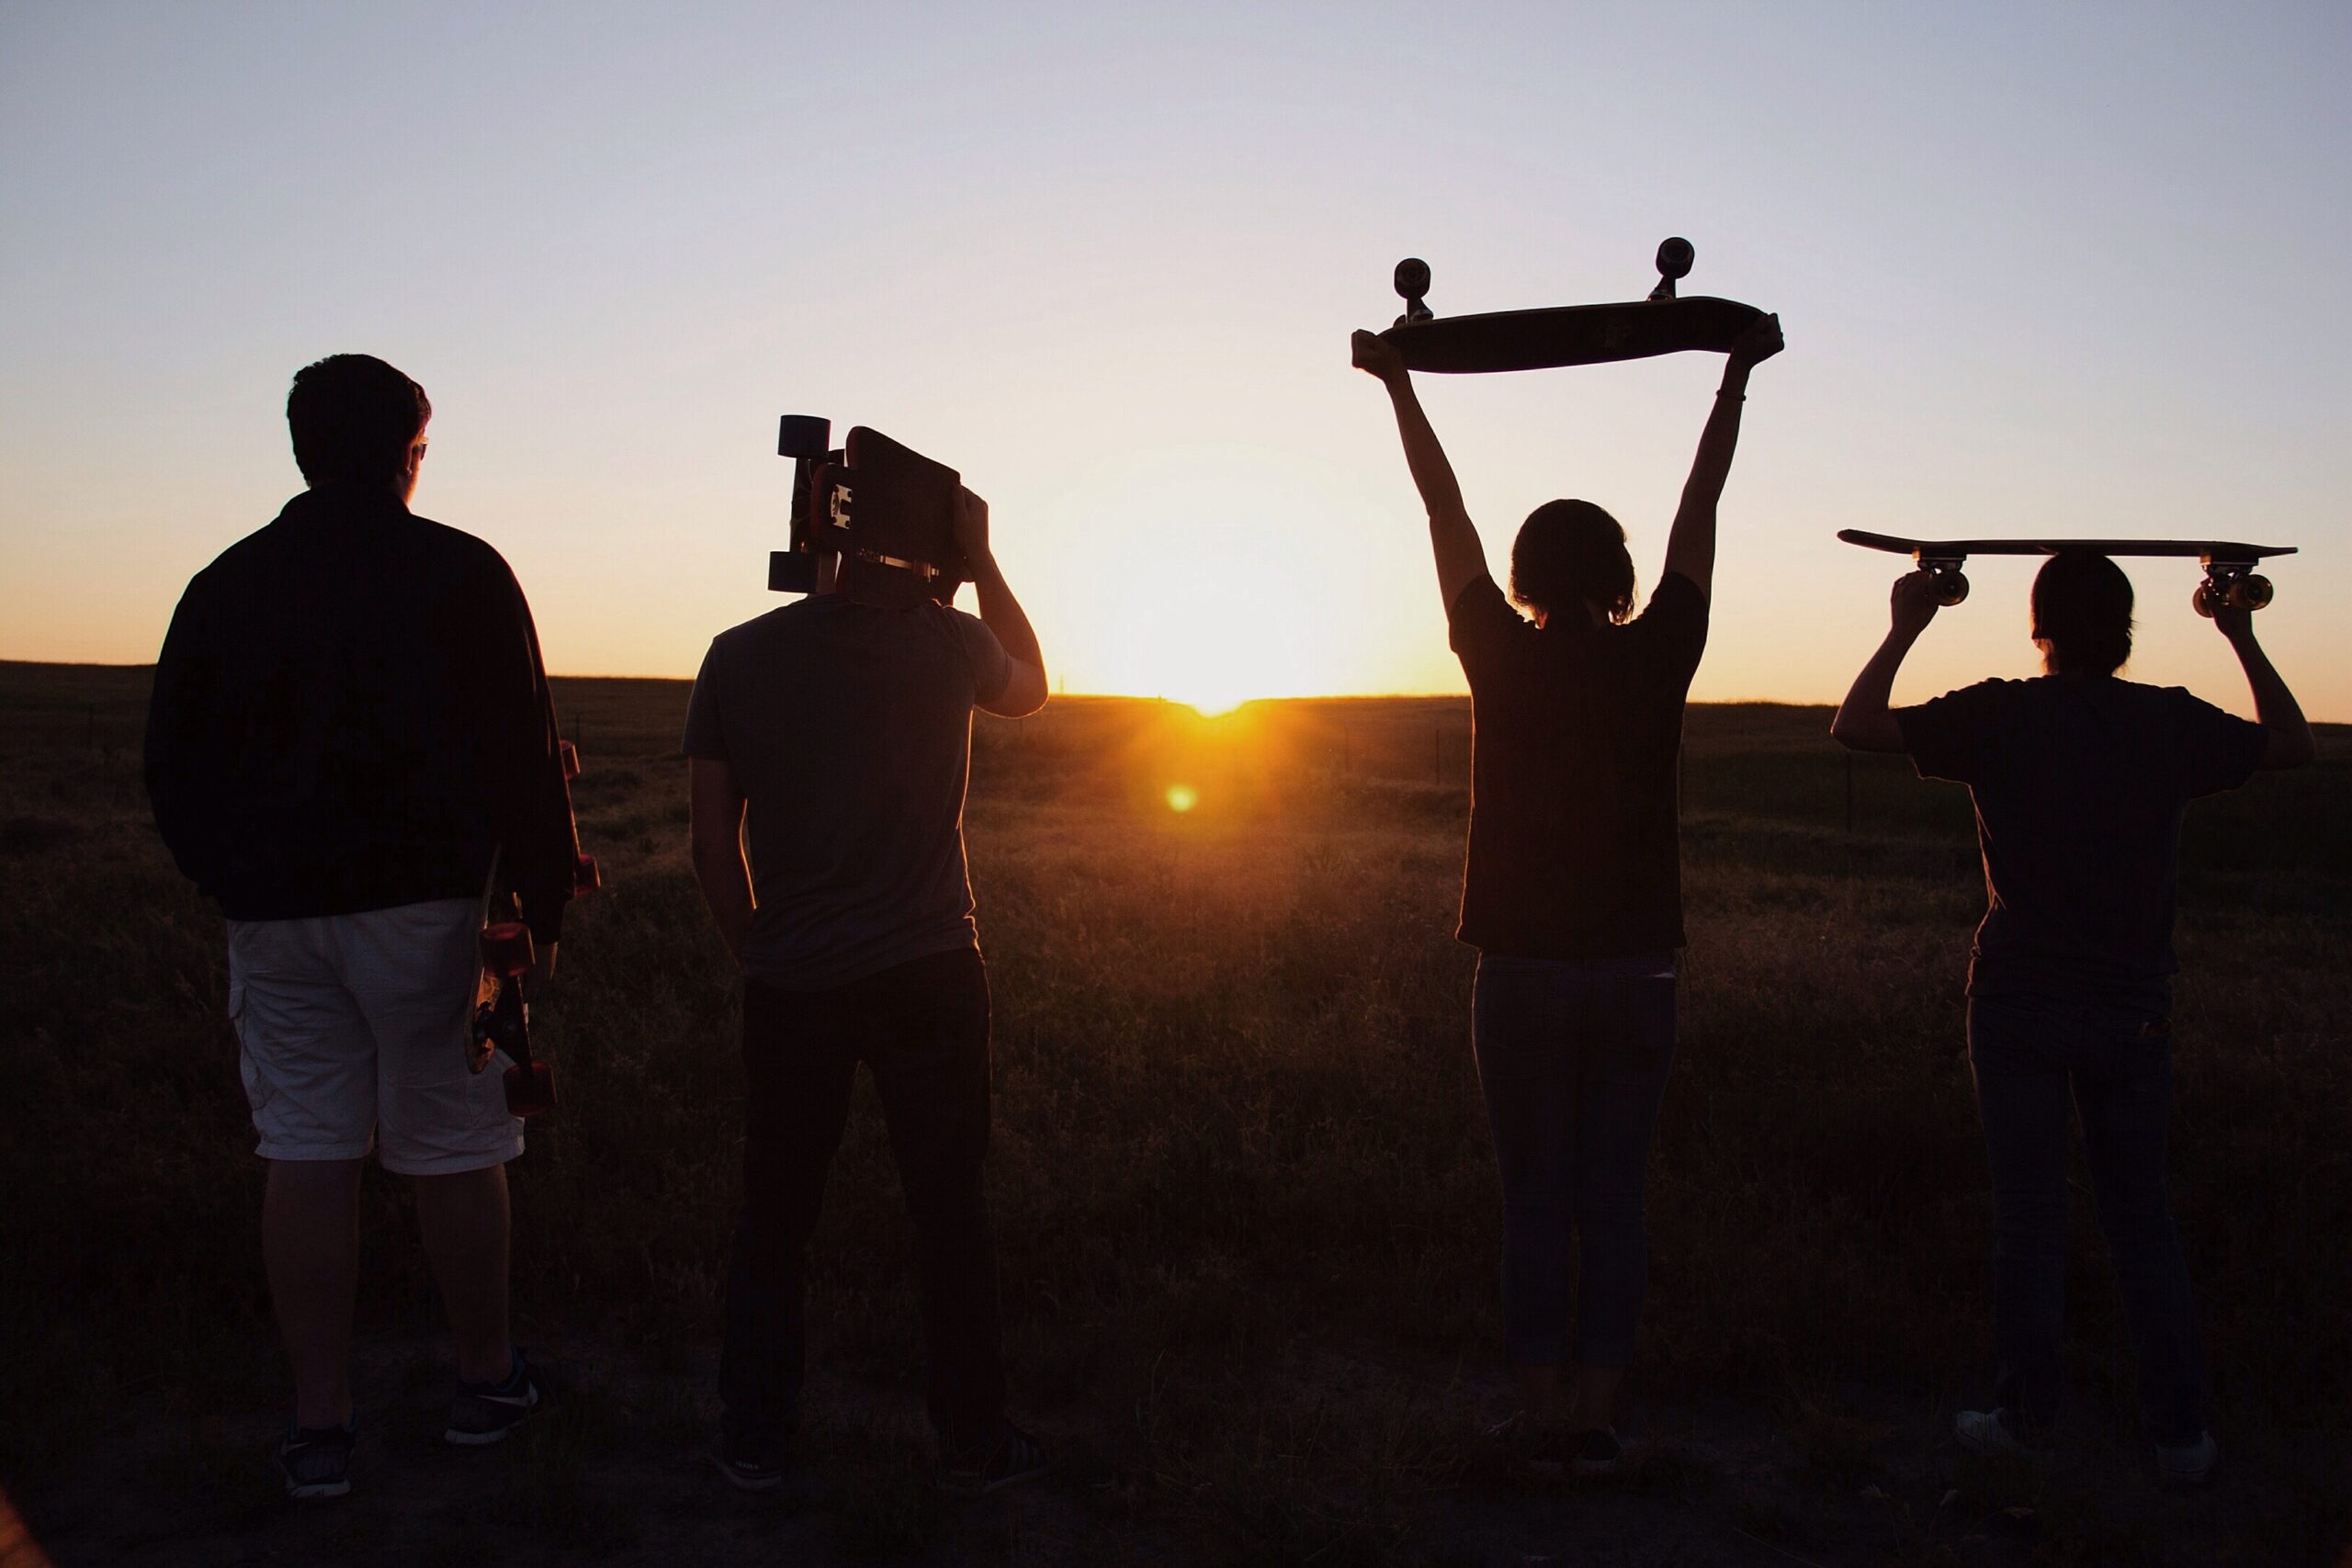 Four young people silhouetted against a sunset, two hold skateboards